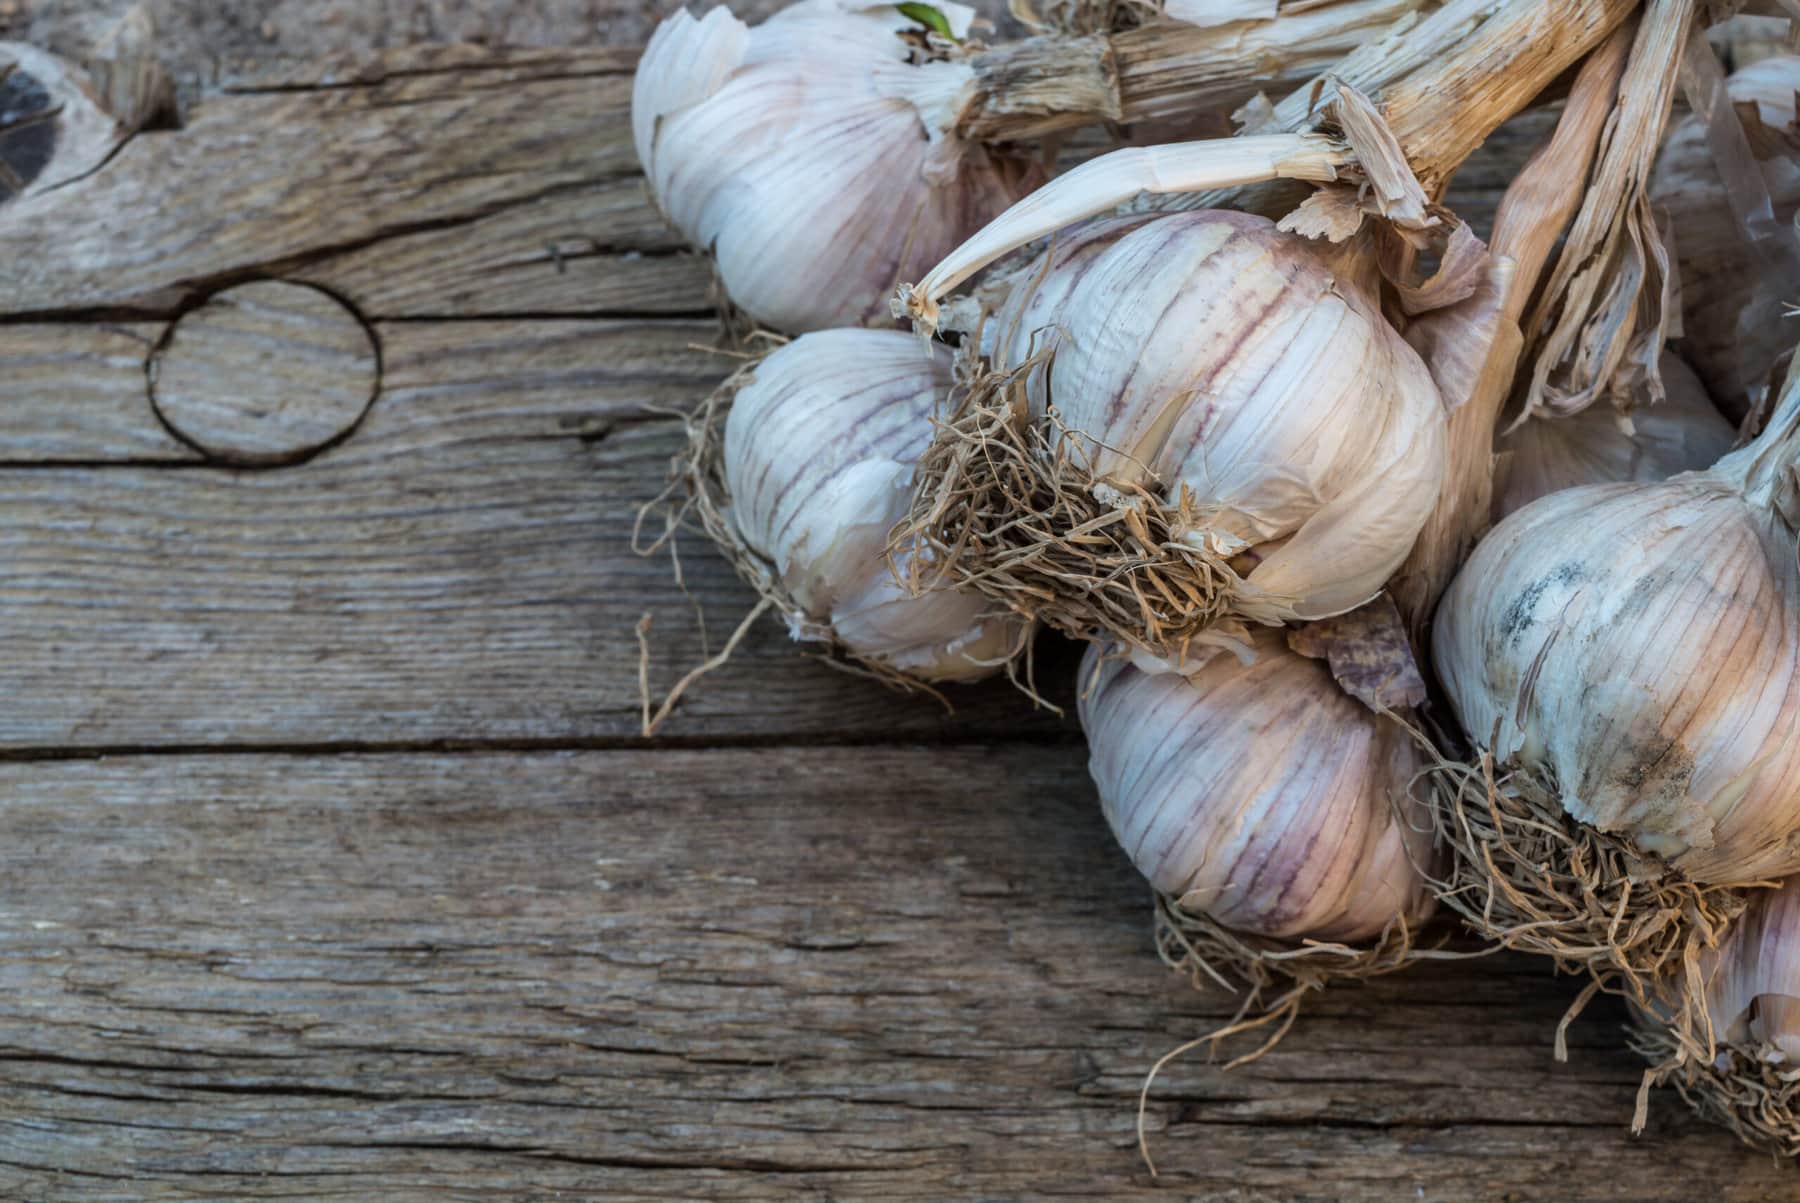 Featured image for “A Garlic Lover’s Guide to Choosing and Cultivating Garlic Varieties”